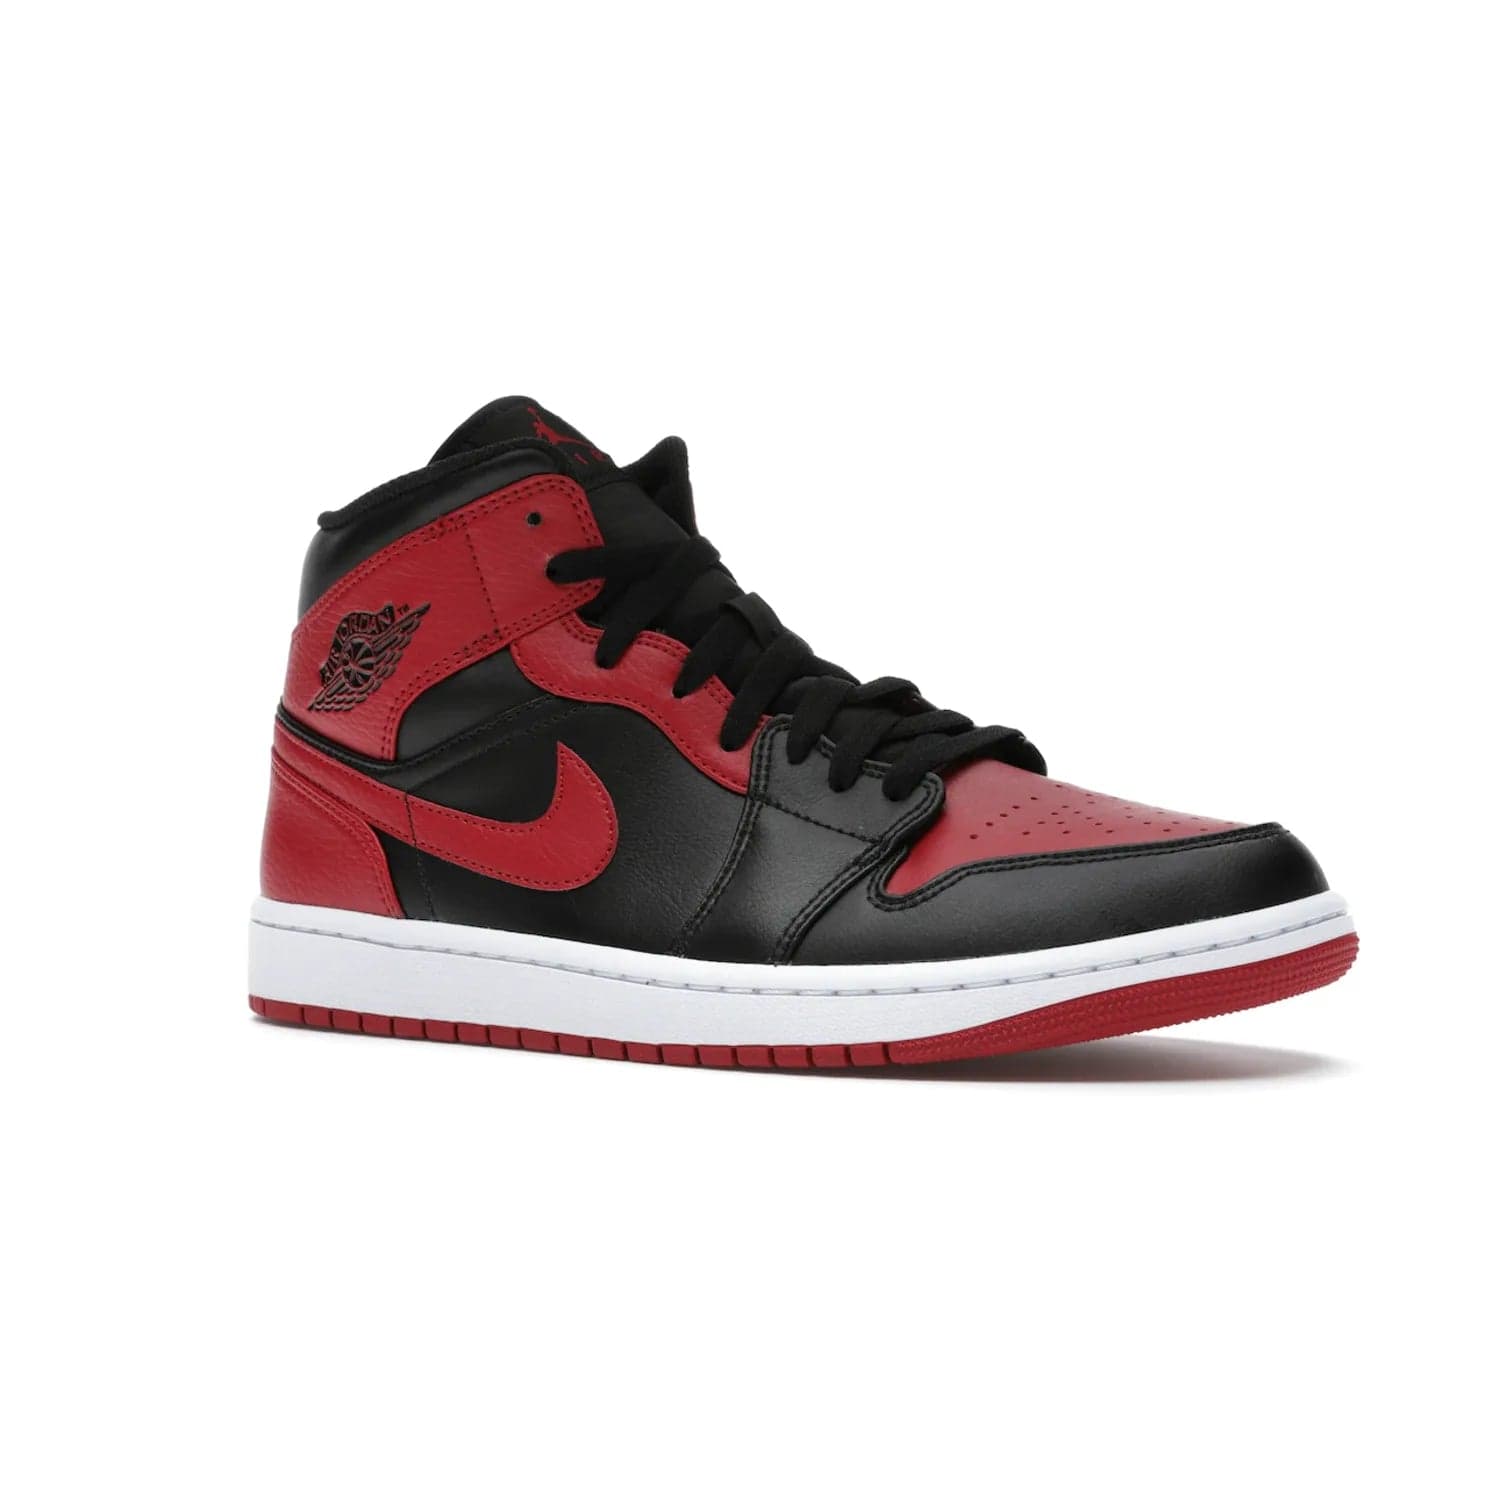 Jordan 1 Mid Banned (2020) - Image 4 - Only at www.BallersClubKickz.com - The Air Jordan 1 Mid Banned (2020) brings a modern twist to the classic Banned colorway. Features full-grain black and red leather uppers, red leather around the toe, collar, heel, & Swoosh. Release November 2021 for $110.